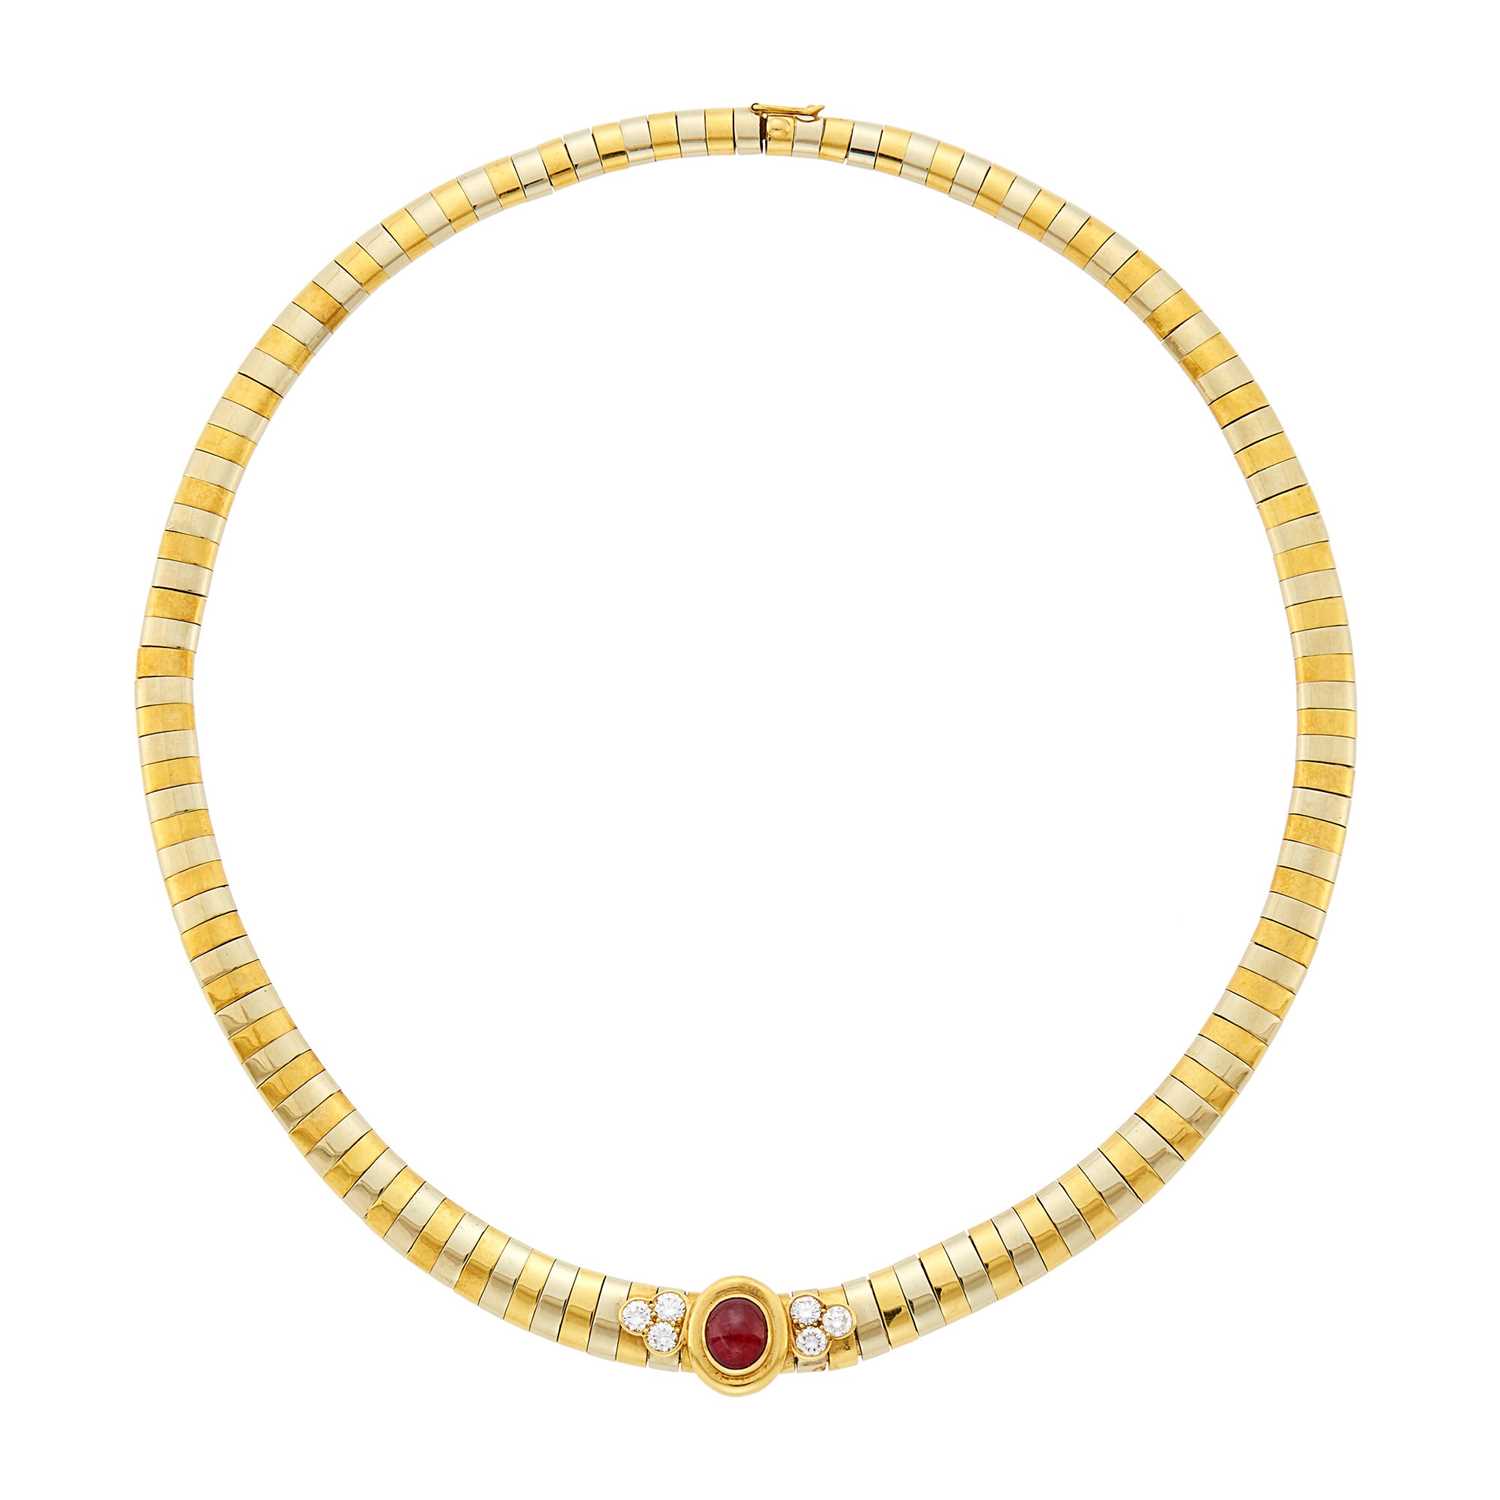 Lot 158 - Van Cleef & Arpels Two-Color Gold, Cabochon Ruby and Diamond Necklace